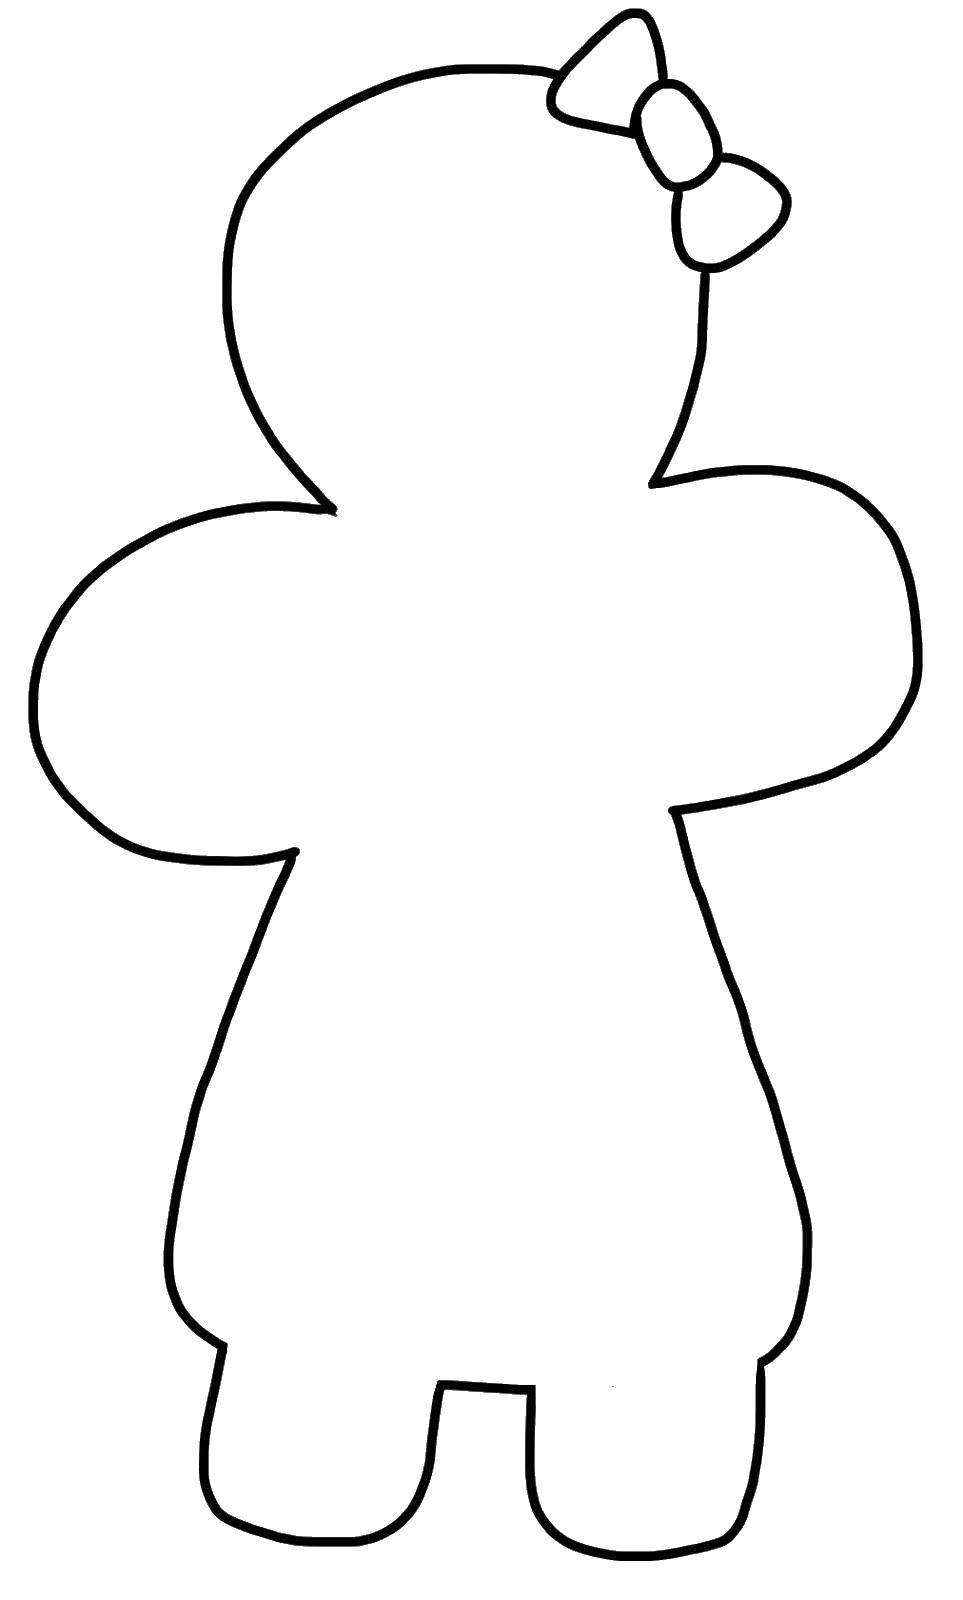 Coloring The outline of the girl with the bow. Category the contour of the child. Tags:  outline , girl, bow.